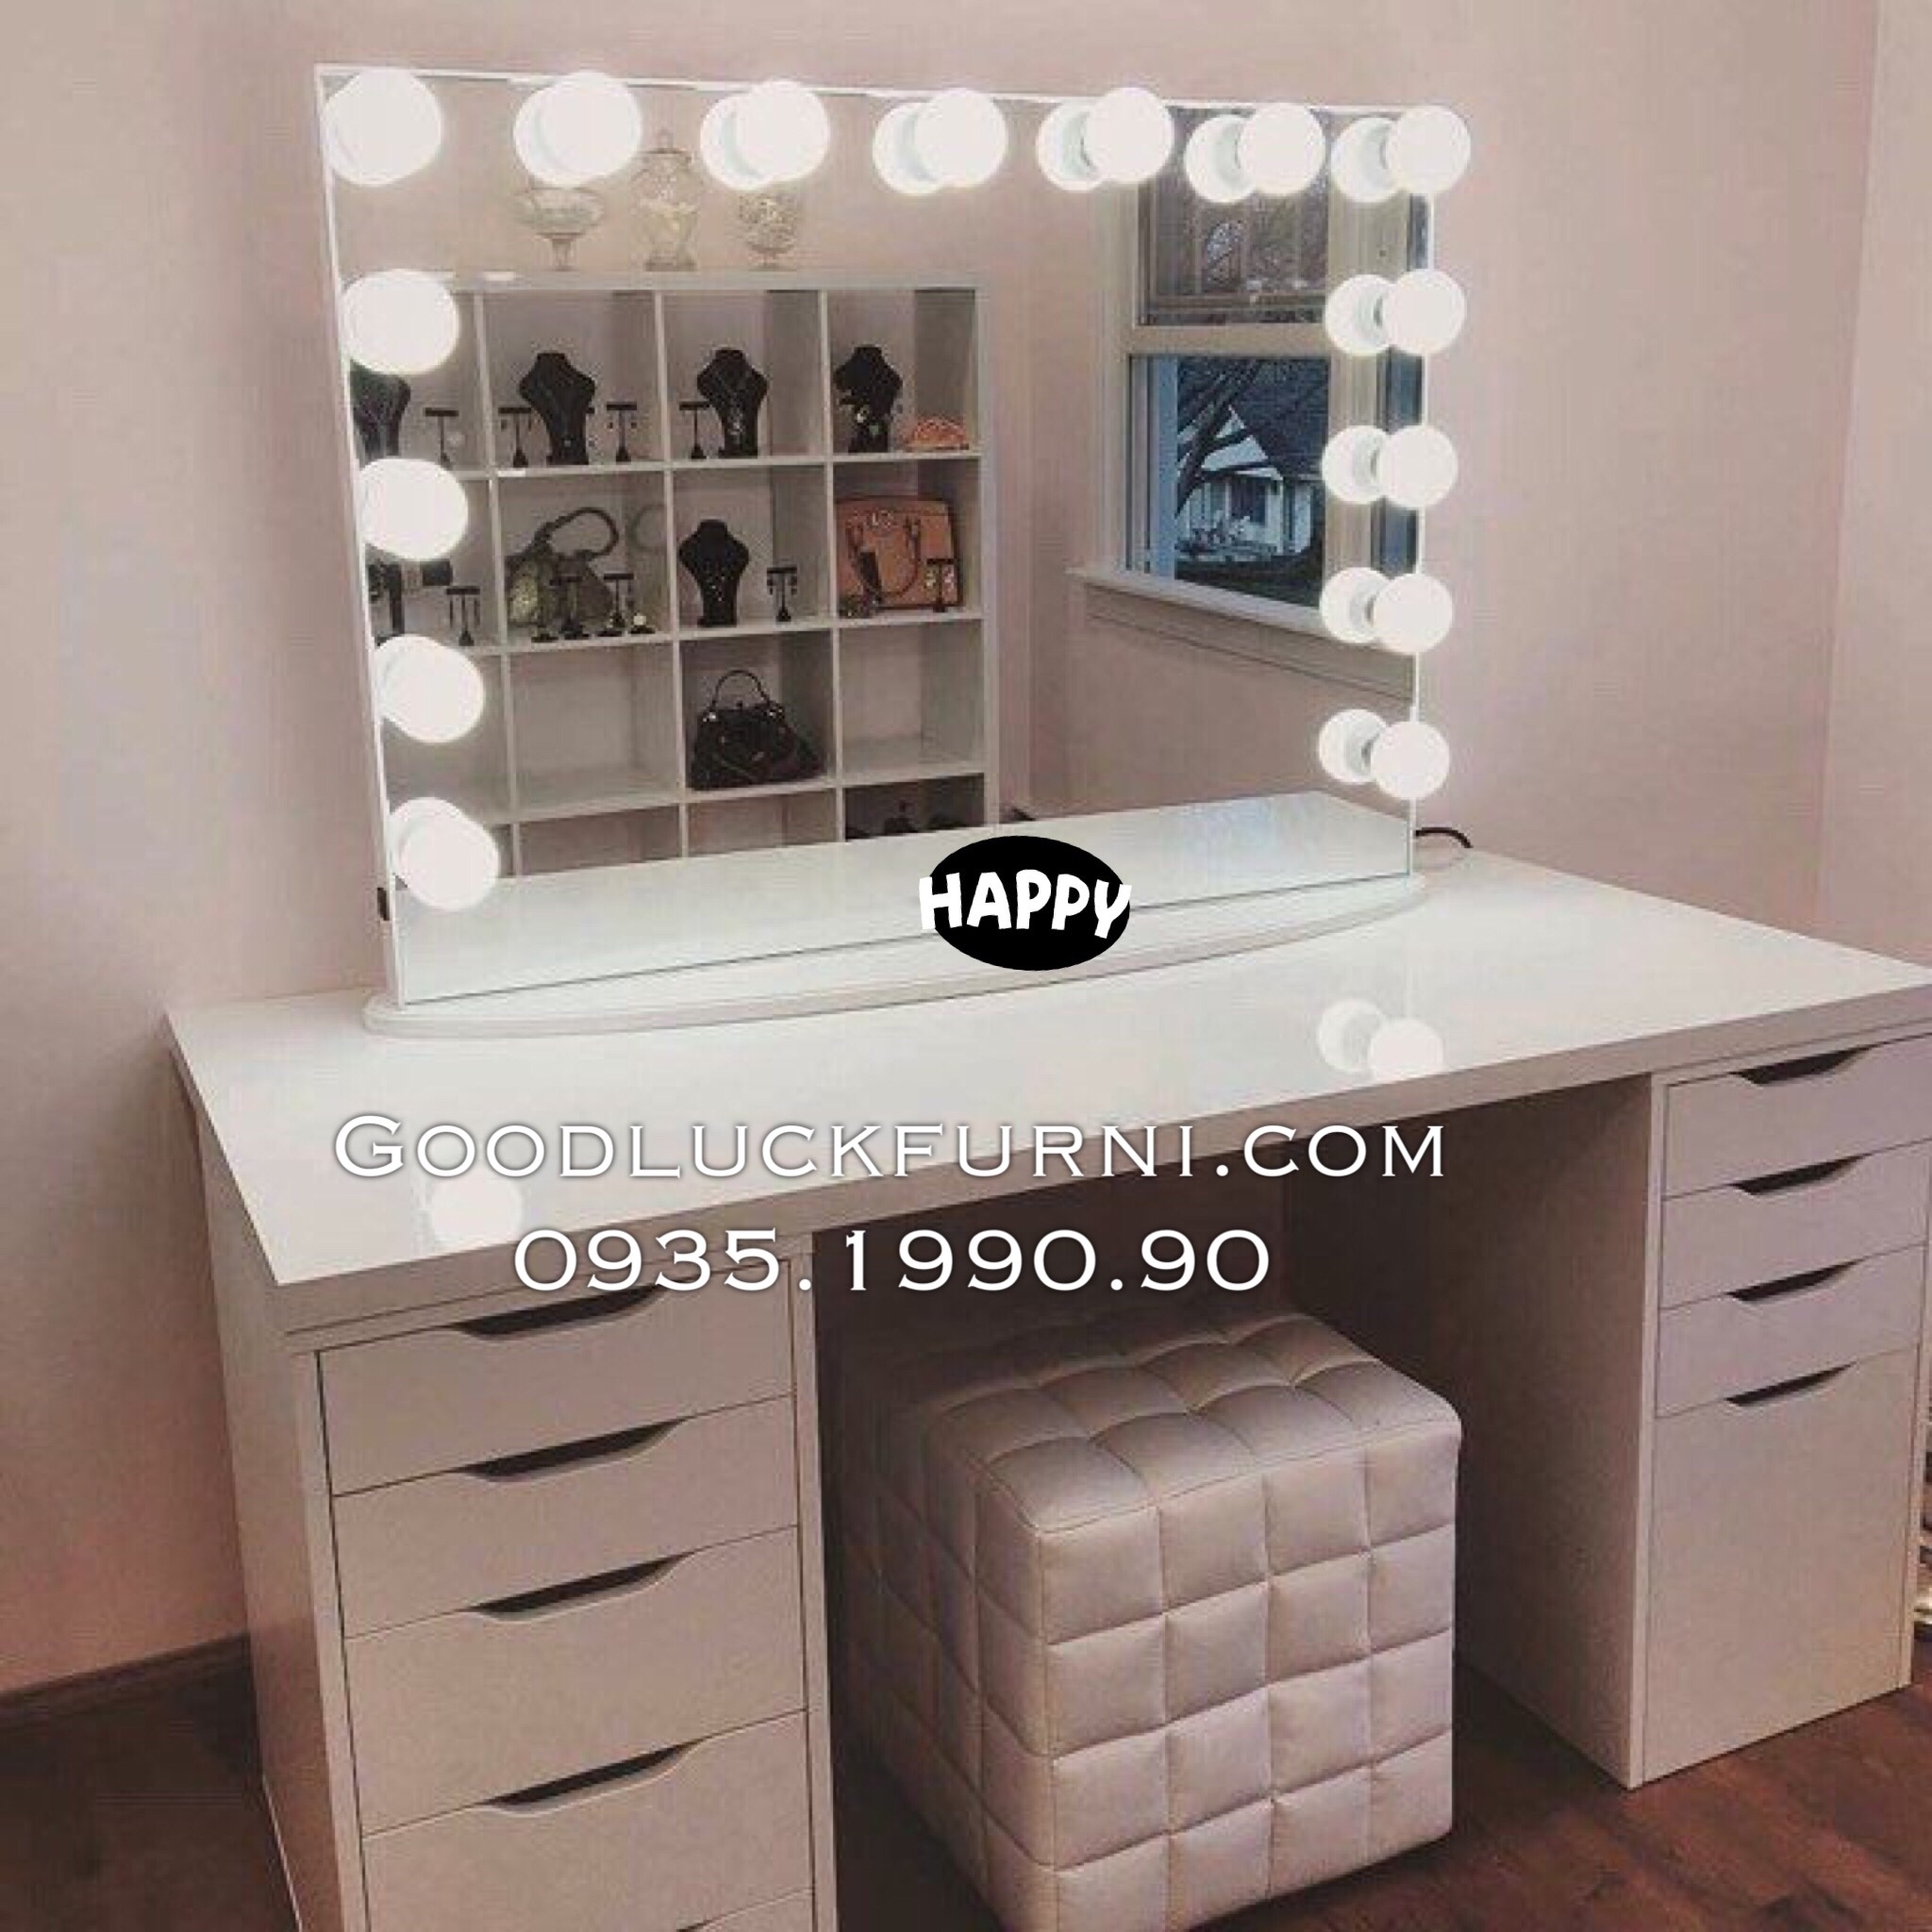 Get Perfect Makeup with Magnification Lighted Makeup Mirror: <a href='/15x-magnifying-mirror/'>1<a href='/5x-magnifying-mirror/'>5x Magnifying Mirror</a></a> with Elegant Lighting